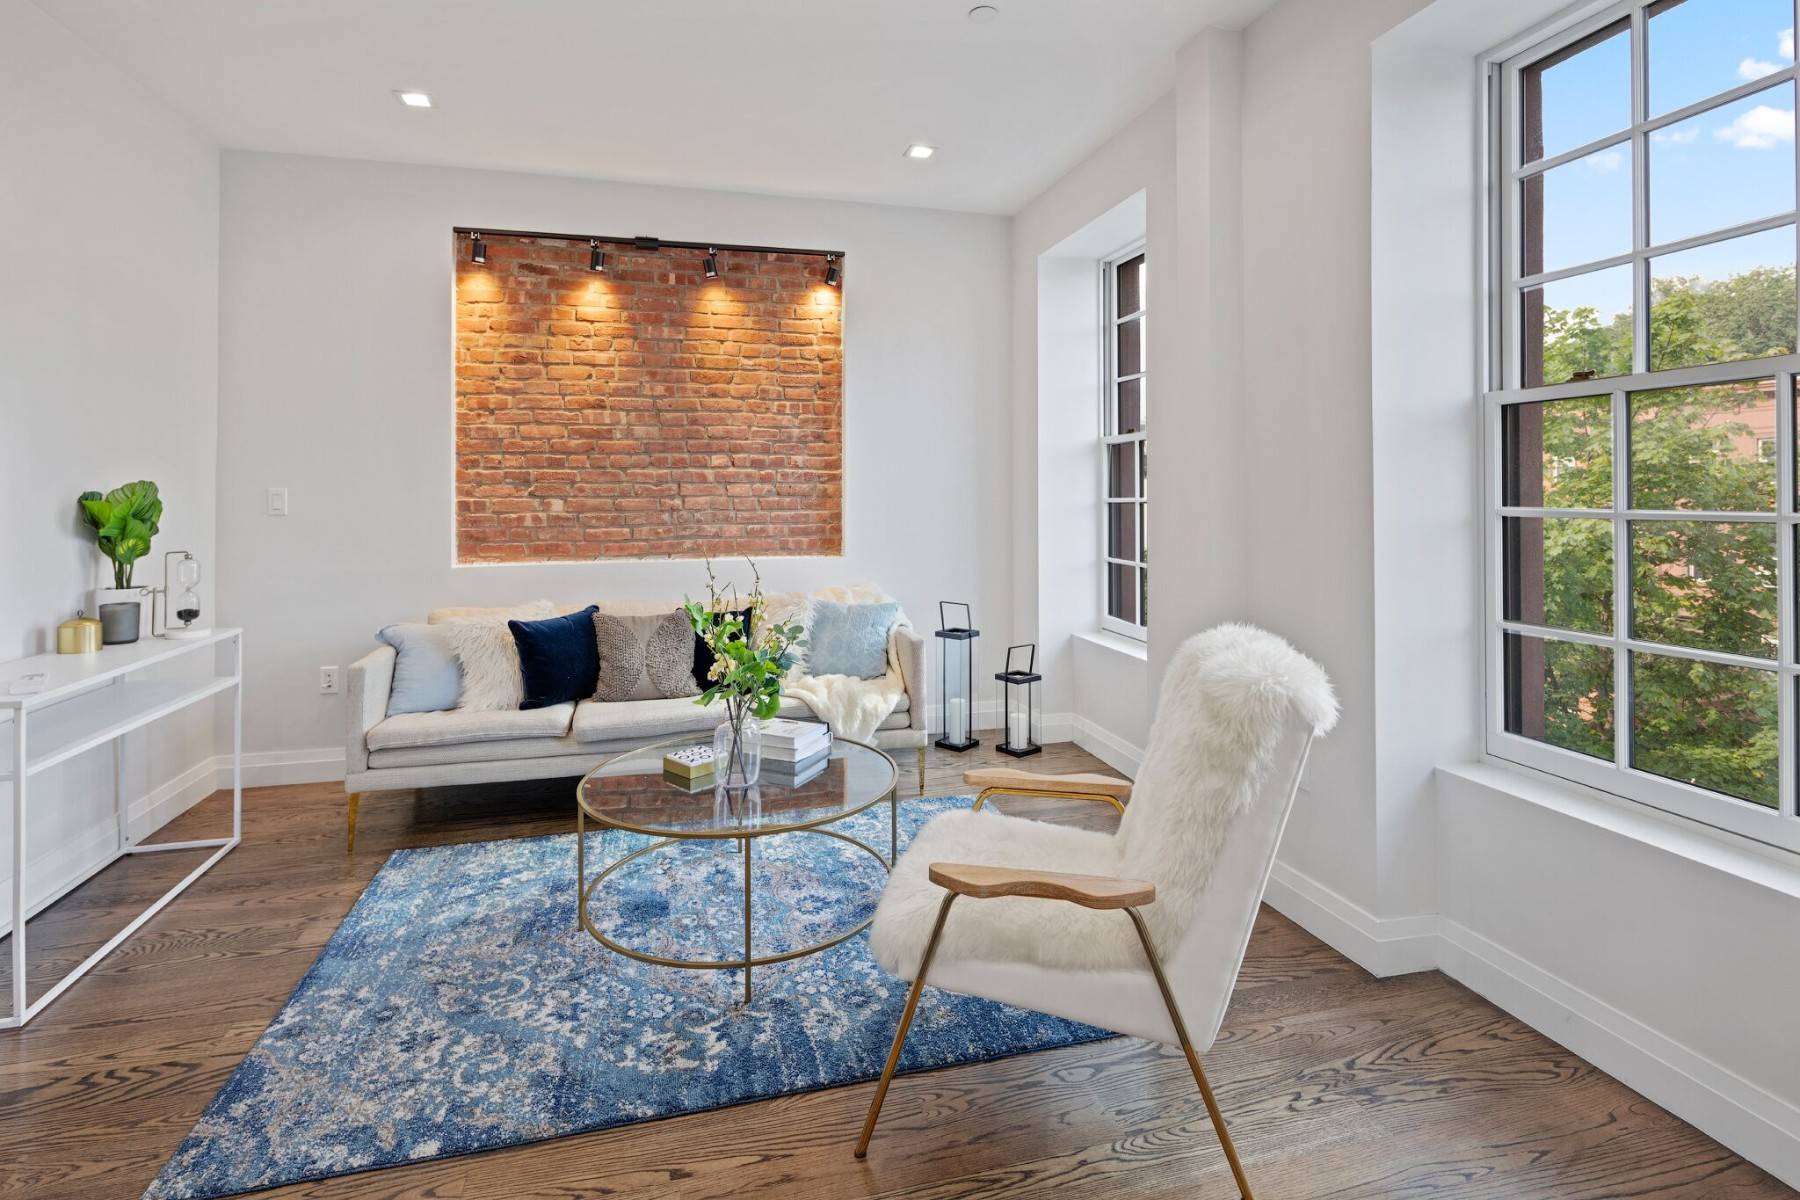 We are proud to present 162 Washington Avenue, a brand new boutique condominium in Brooklyns stylish Clinton Hill neighborhood.